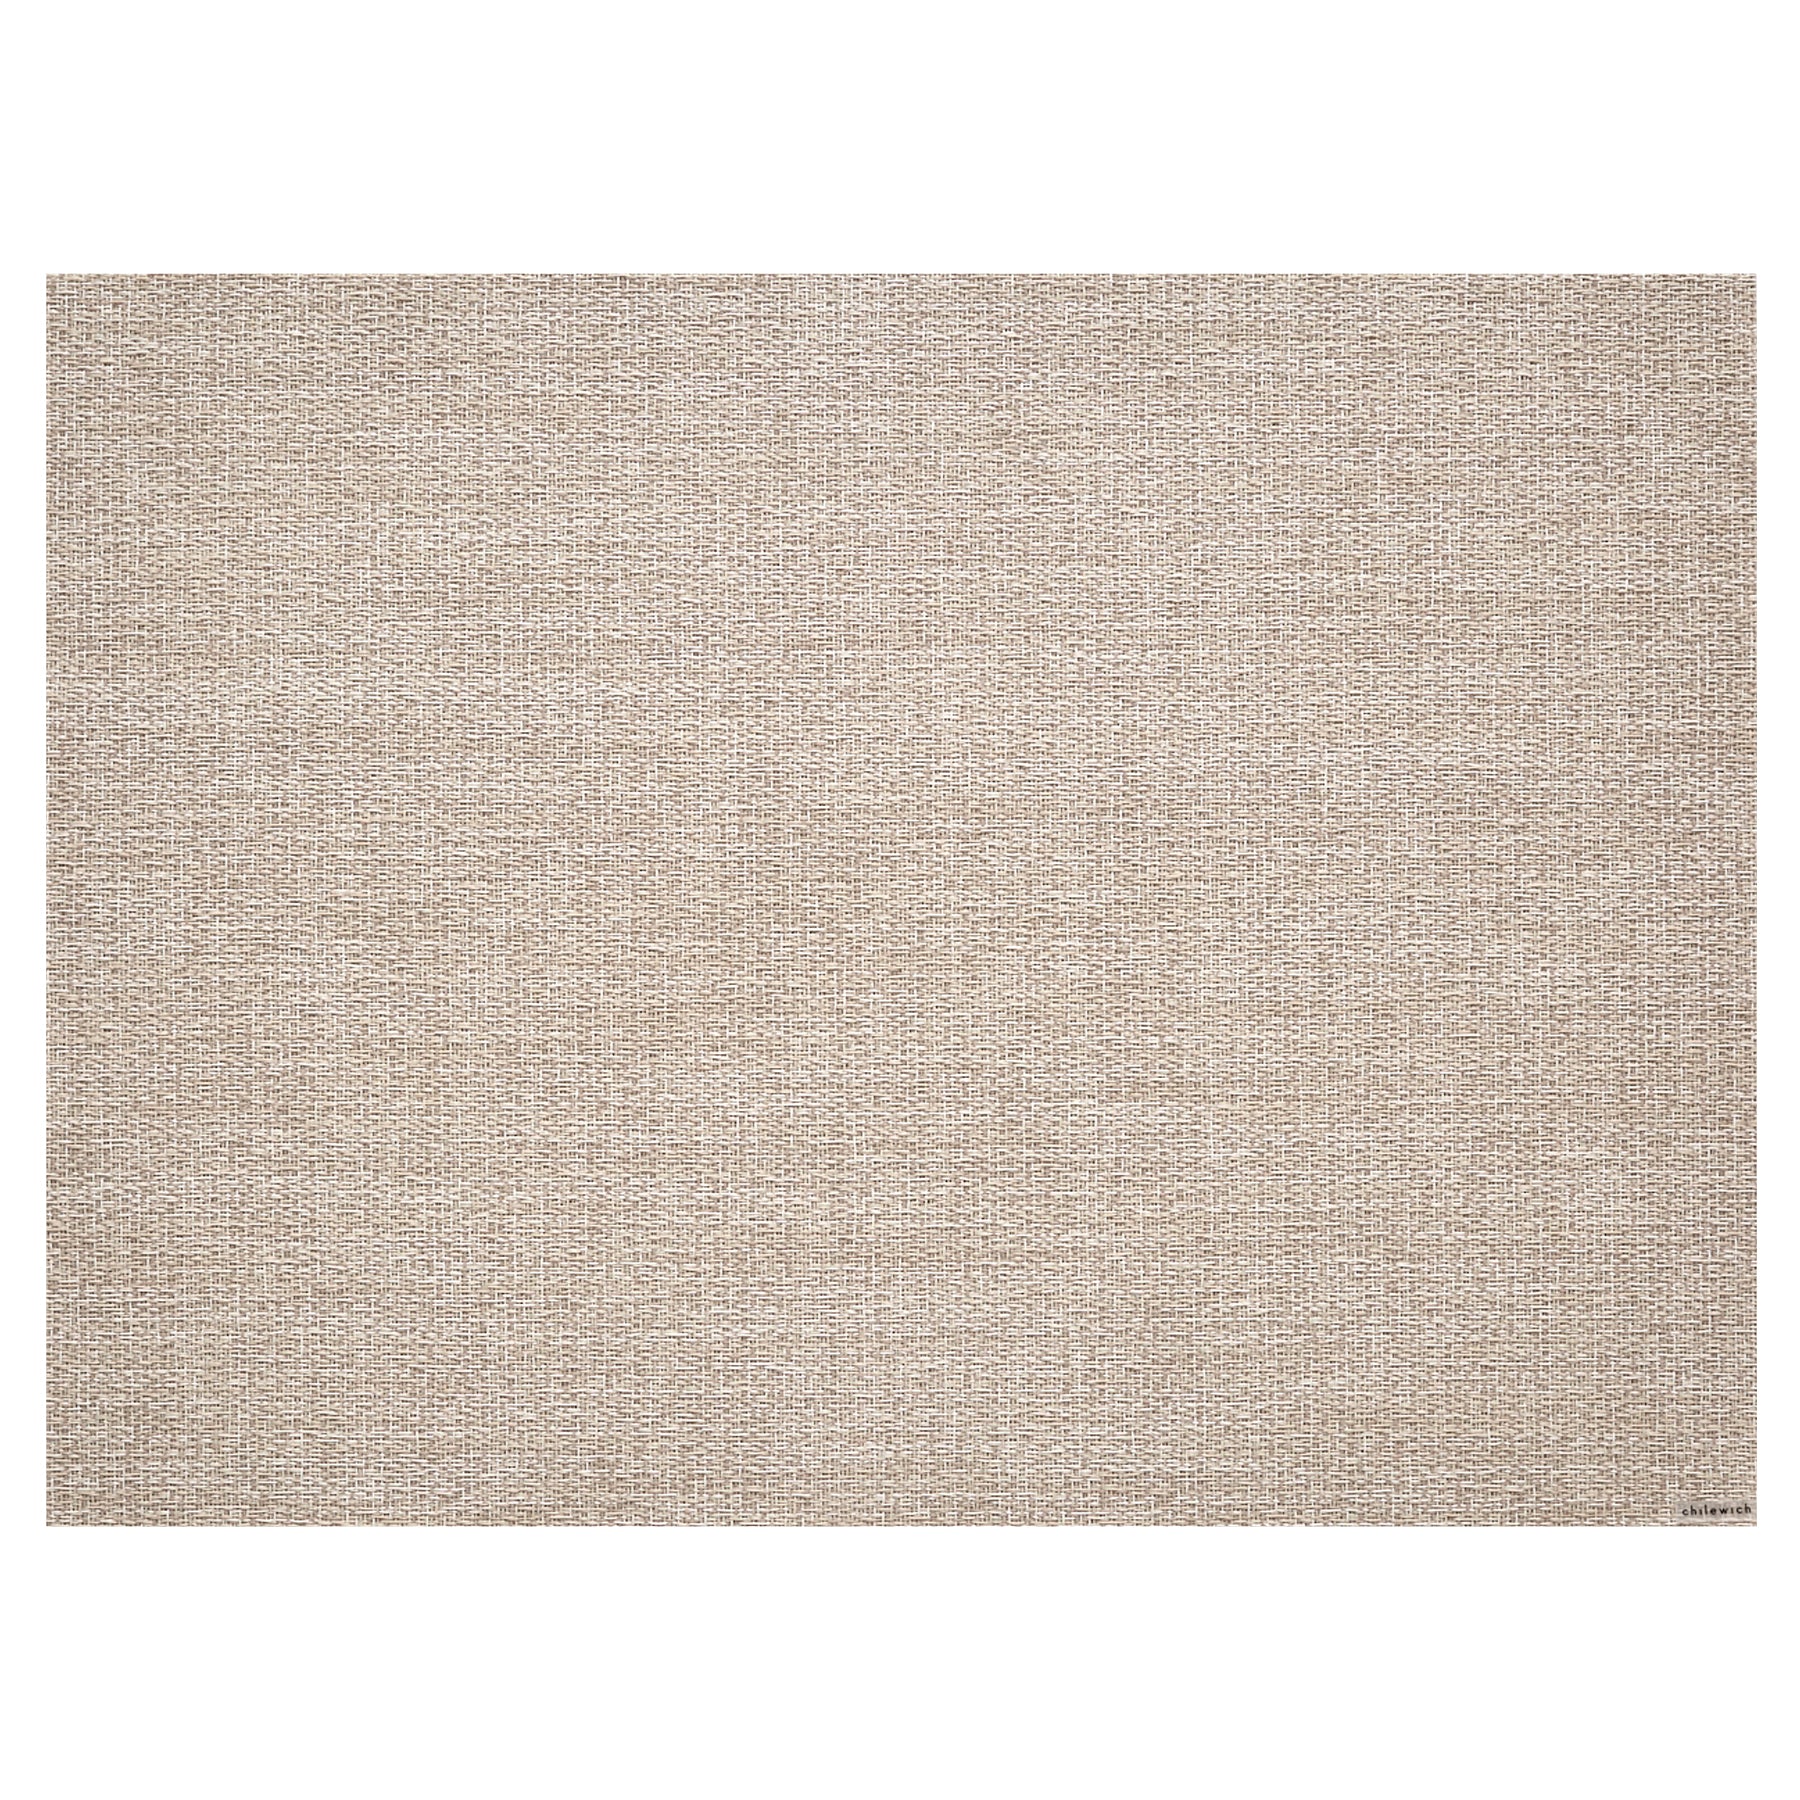 Chilewich Placemat - Bouclé - Natural